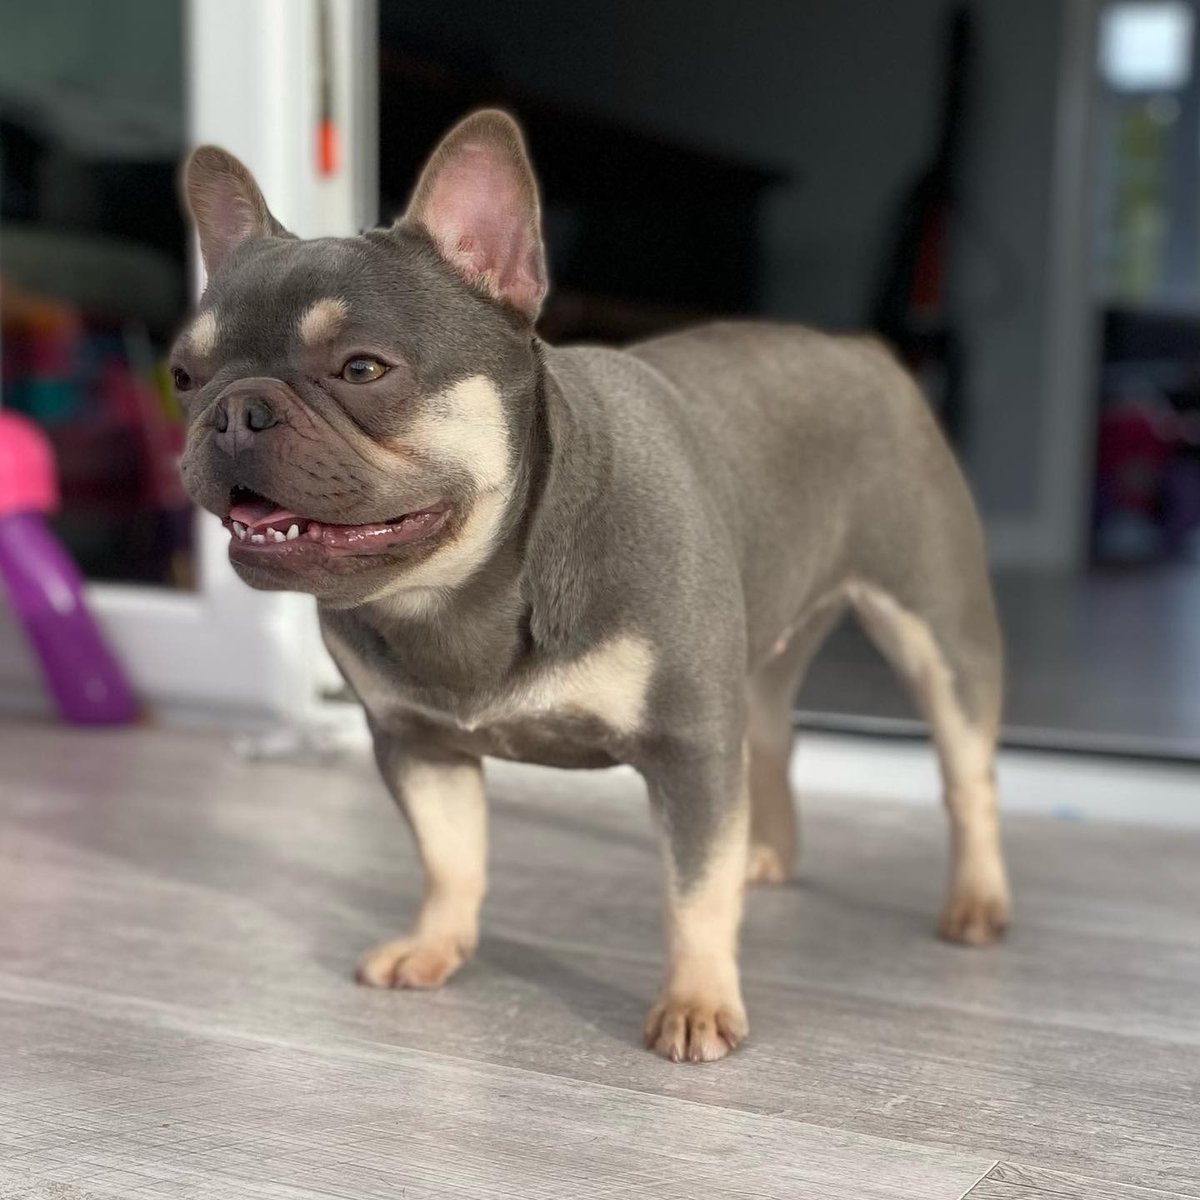 My best friend has a fur and a tail 🫠

#FrenchBulldogLove #FrenchieFever #FrenchieLove #frenchbulldog #frenchie  #frenchiepuppy #frenchielife #bulldog  #frenchie  #frenchbulldogsofinstagram